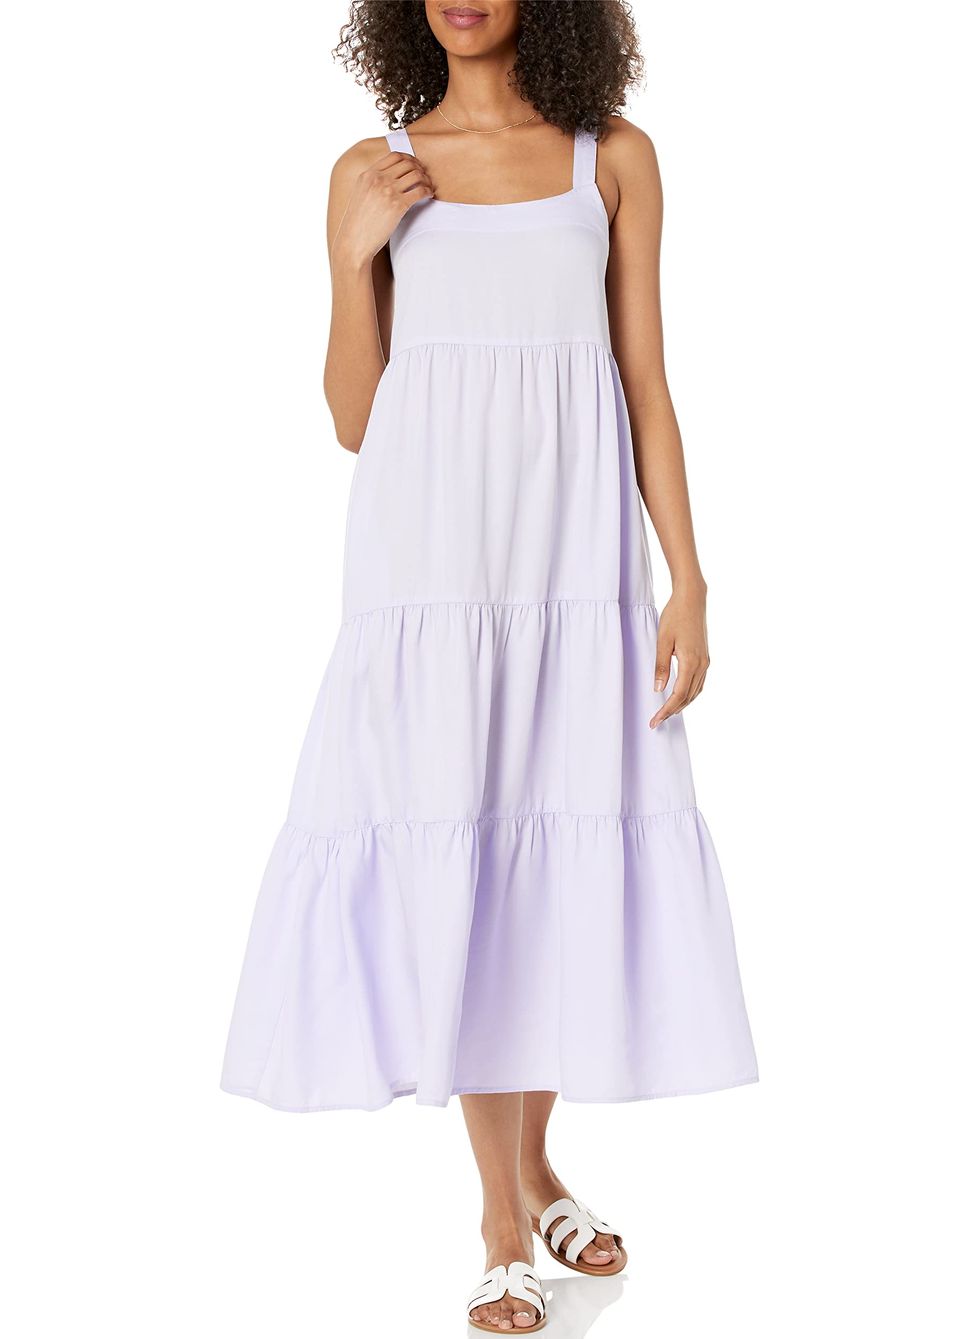 The Viral Amazon Summer Dress Is On Sale For Prime Day Today